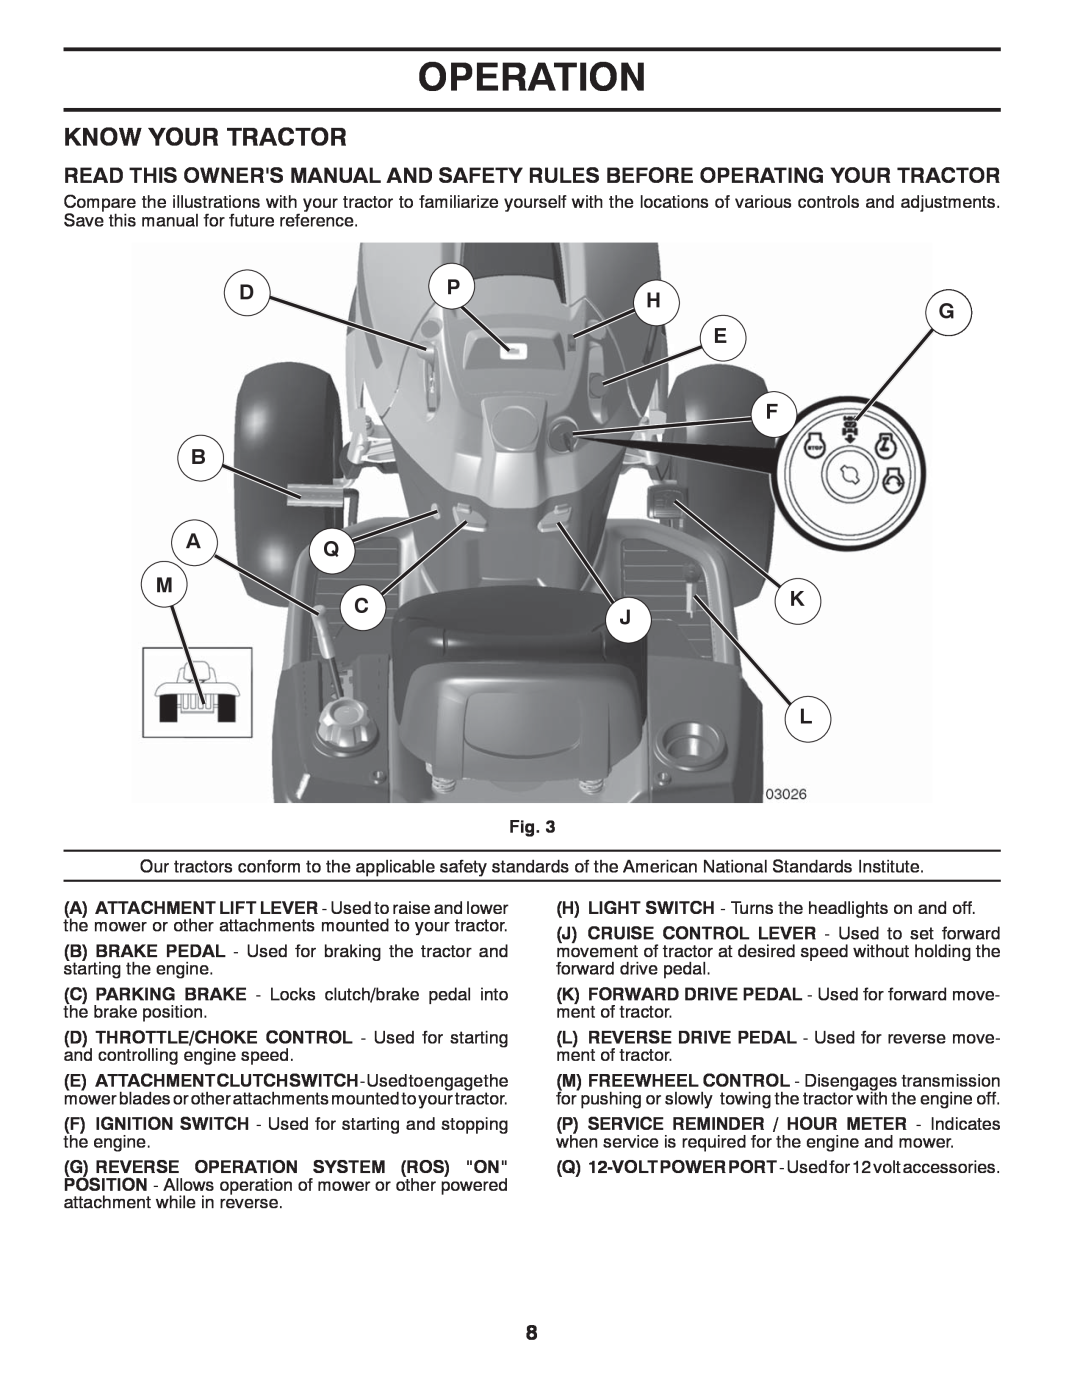 Husqvarna GTH2752TF owner manual Know Your Tractor, Dphg E F, Cjk L, Operation 